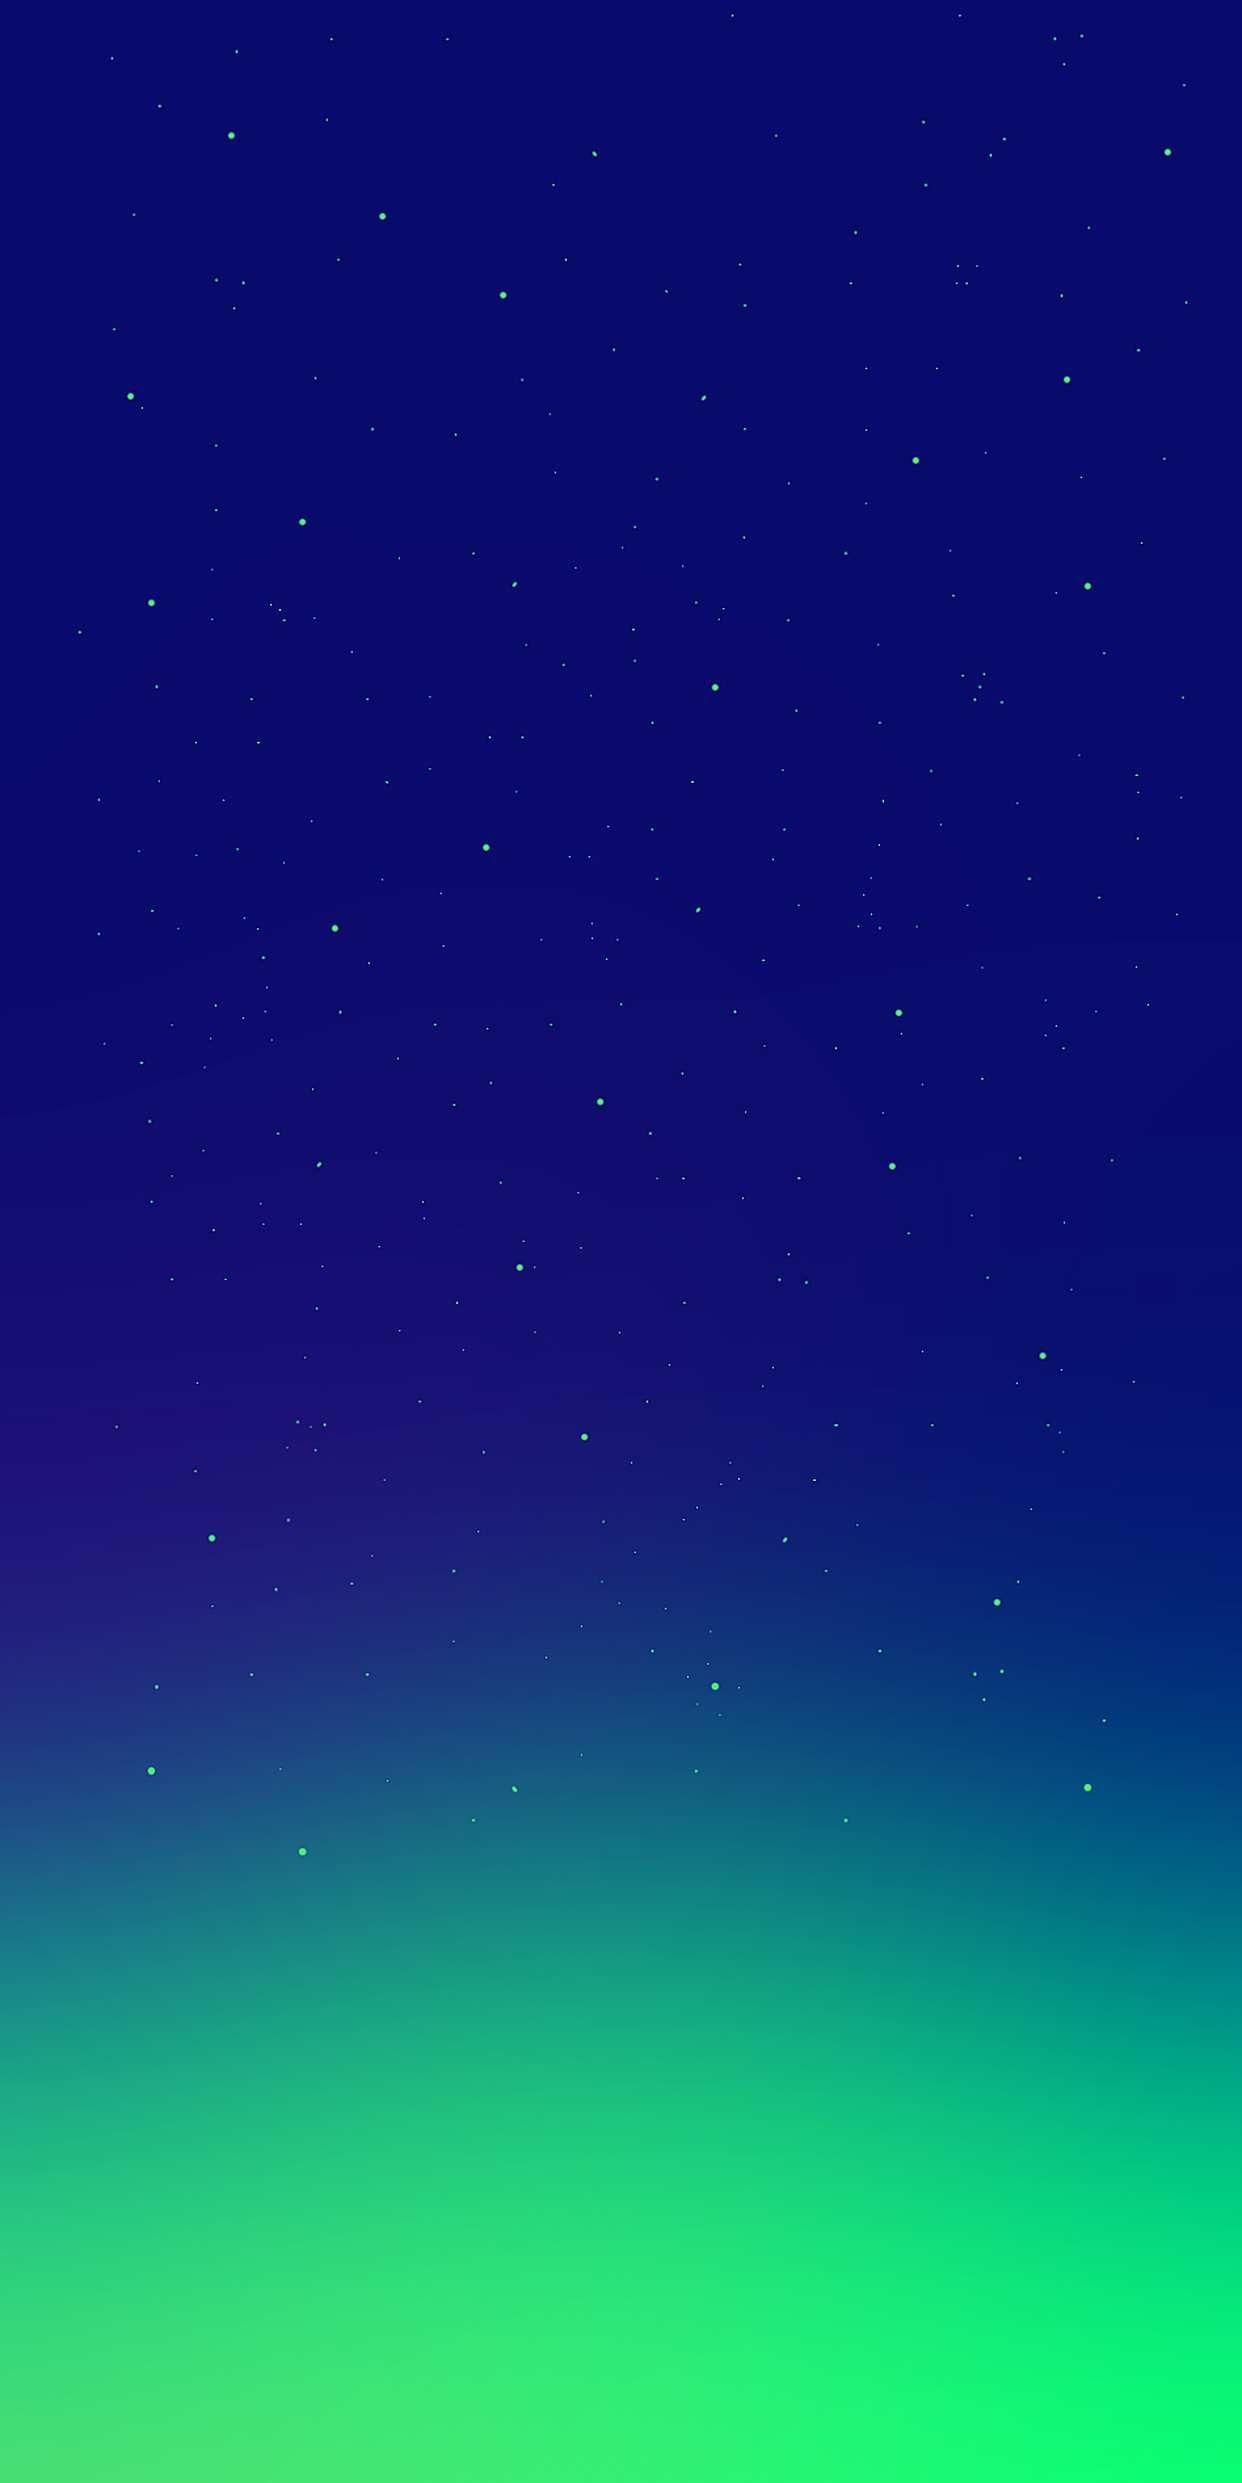 Universe for iPhone XS MAX iPhone XR. iPhone Wallpaper in 2019